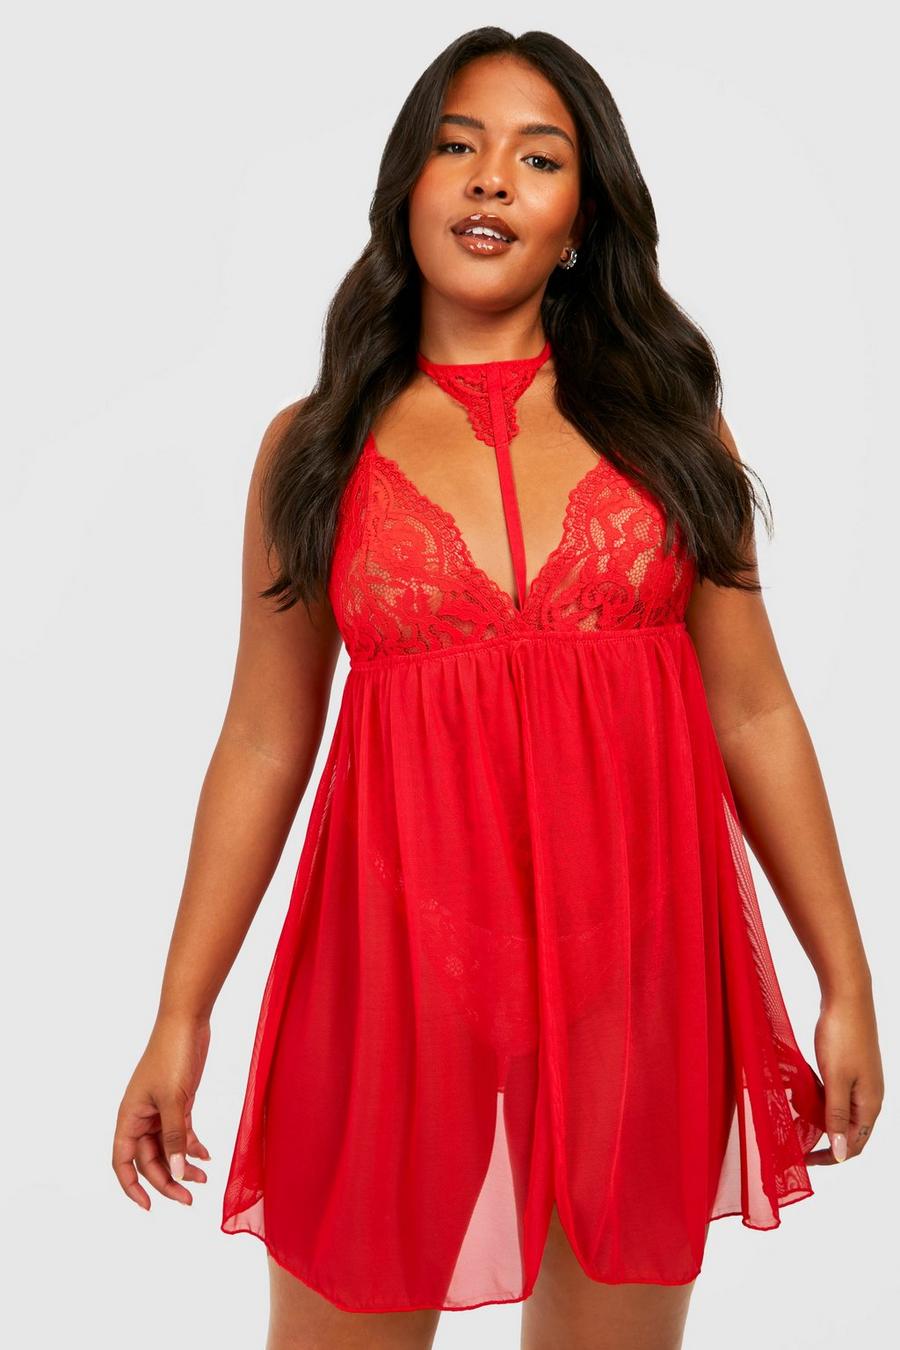 Plus Size Sexy Red Halter Neck Babydoll Lingerie - Leopard & Lace